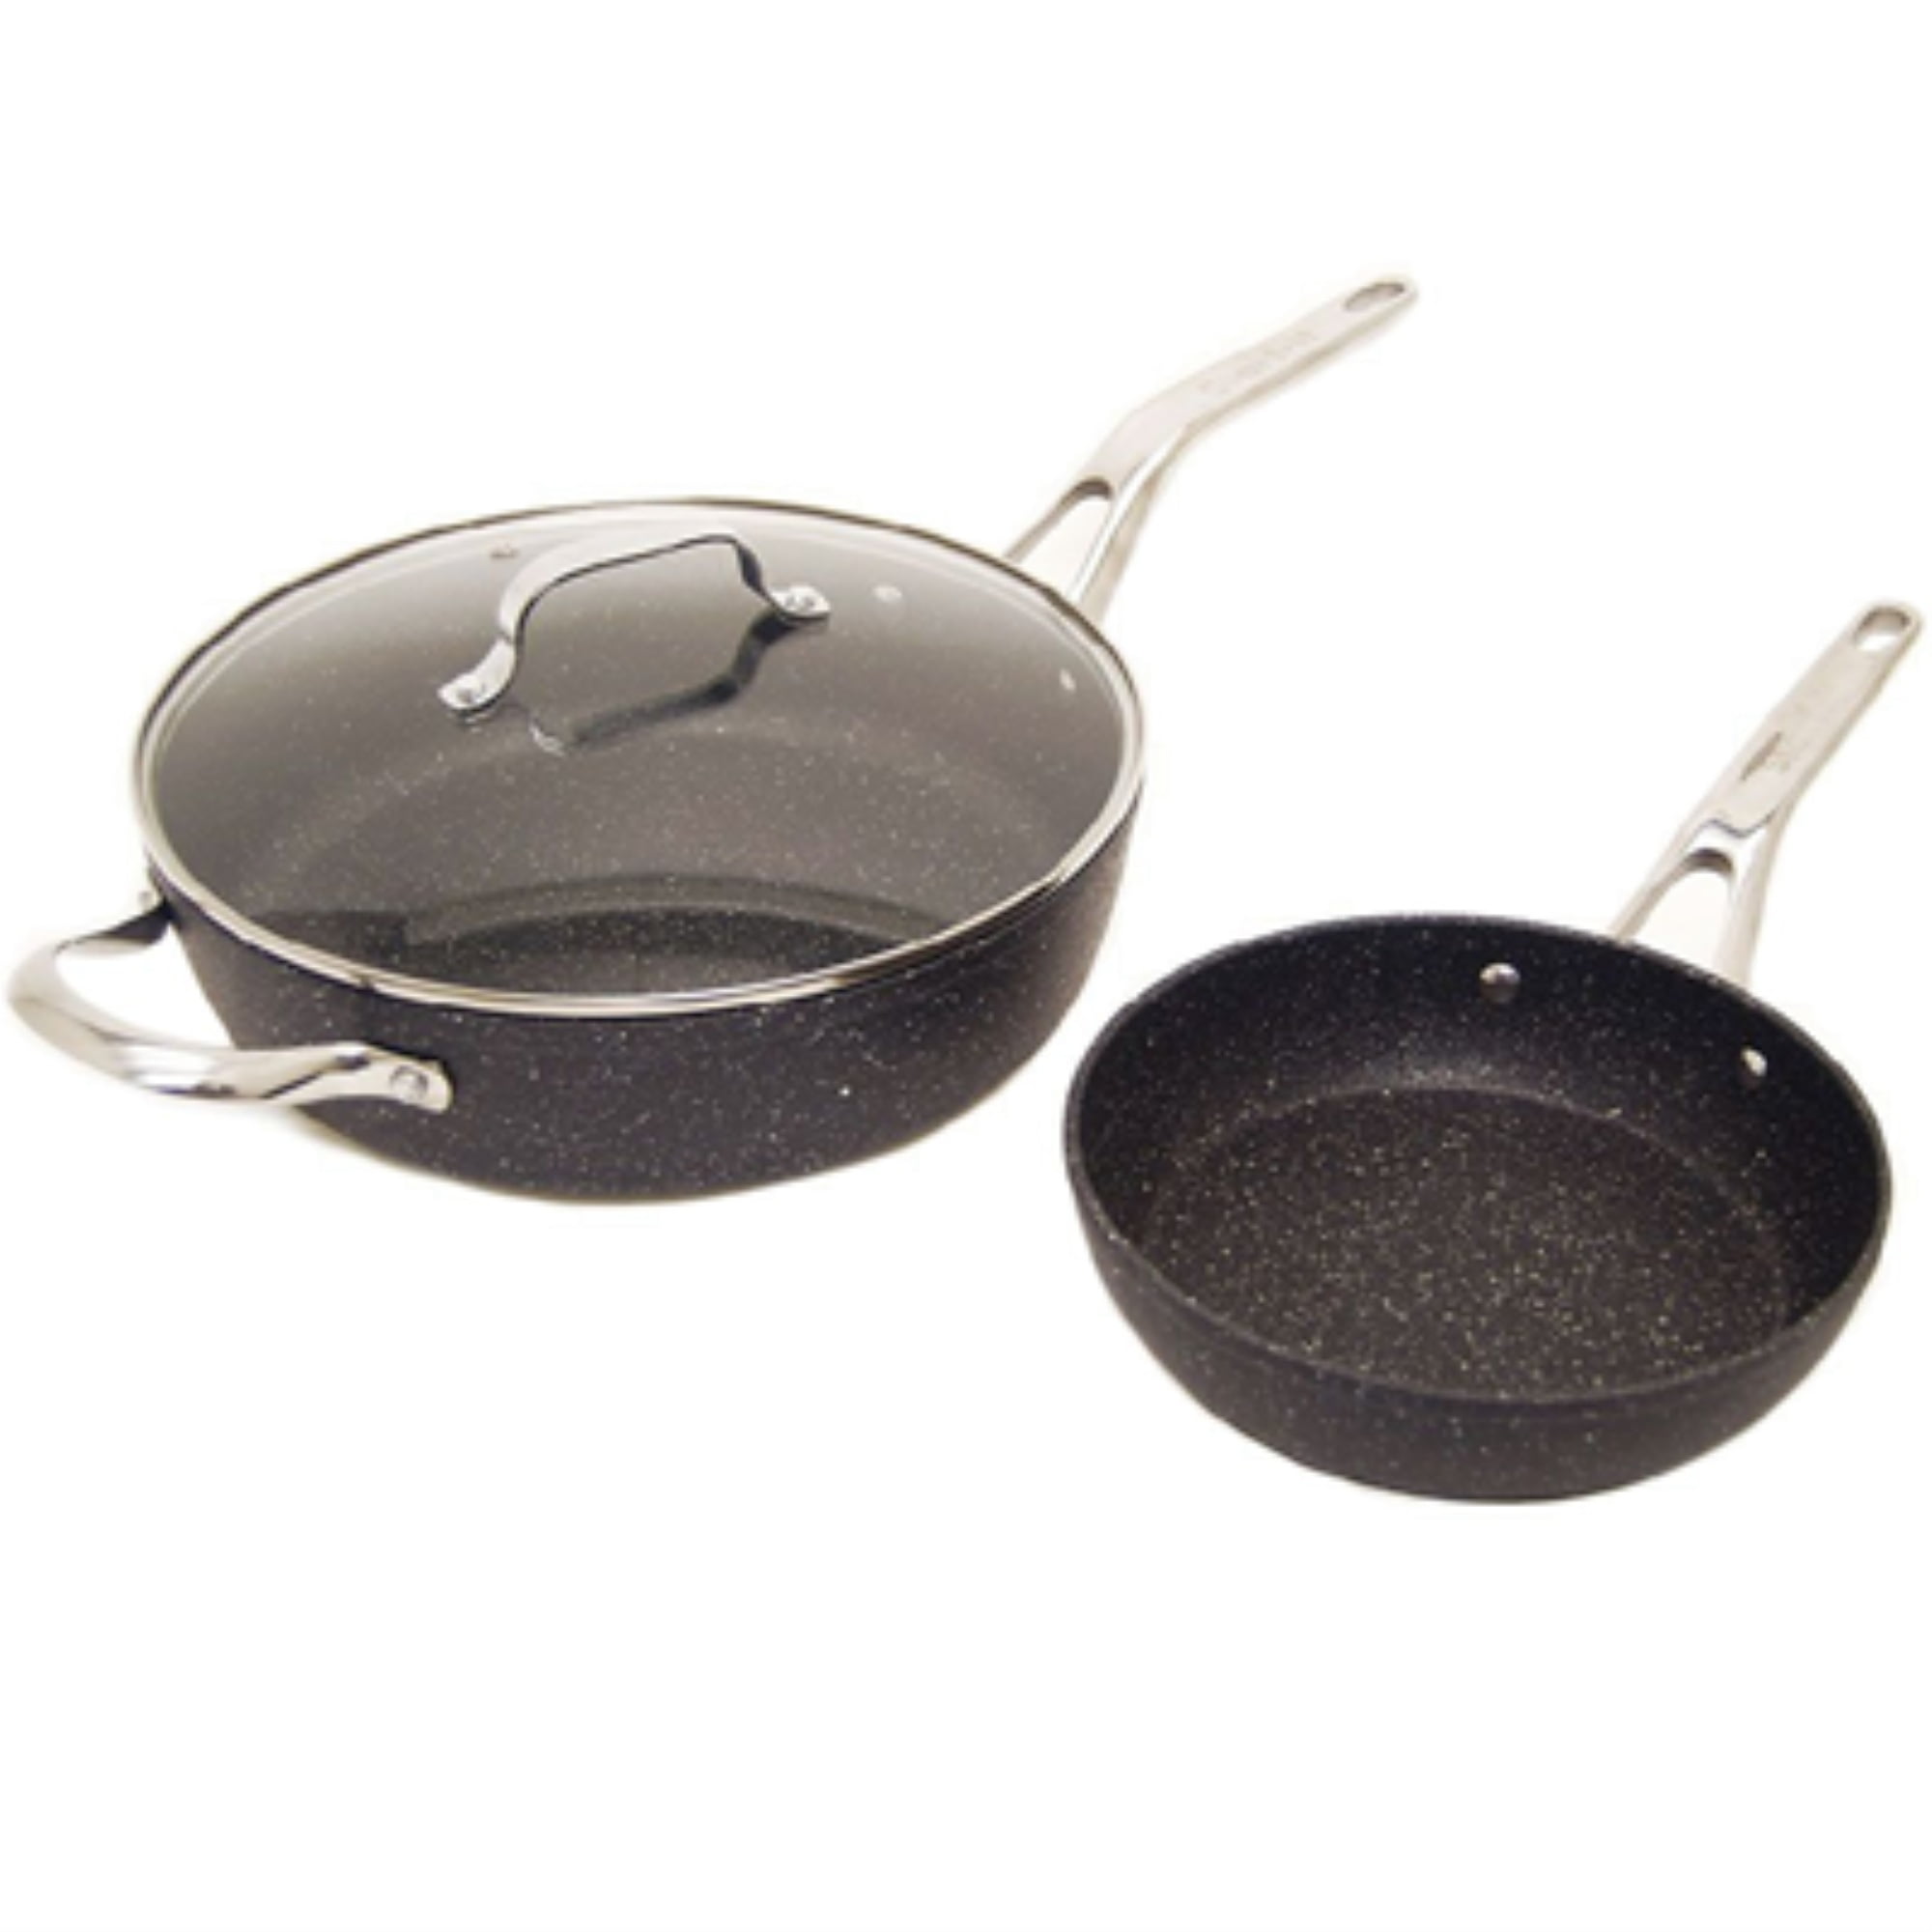 THE ROCK by Starfrit Stainless Steel Non-Stick 8-Piece Cookware Set With  Stainless Steel Handles